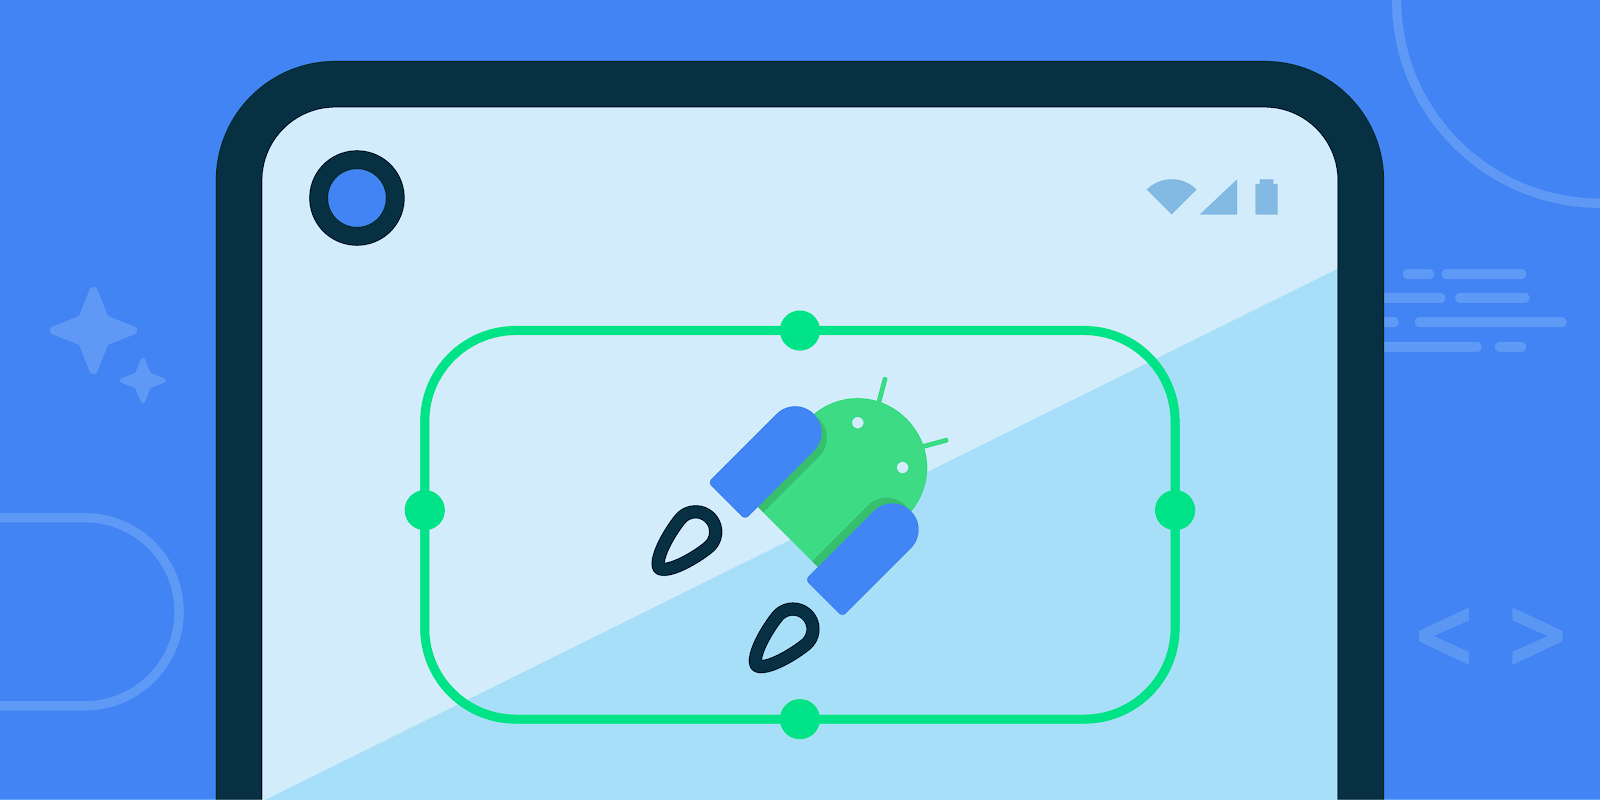 Illustration of a laptop with the Android rocket logo